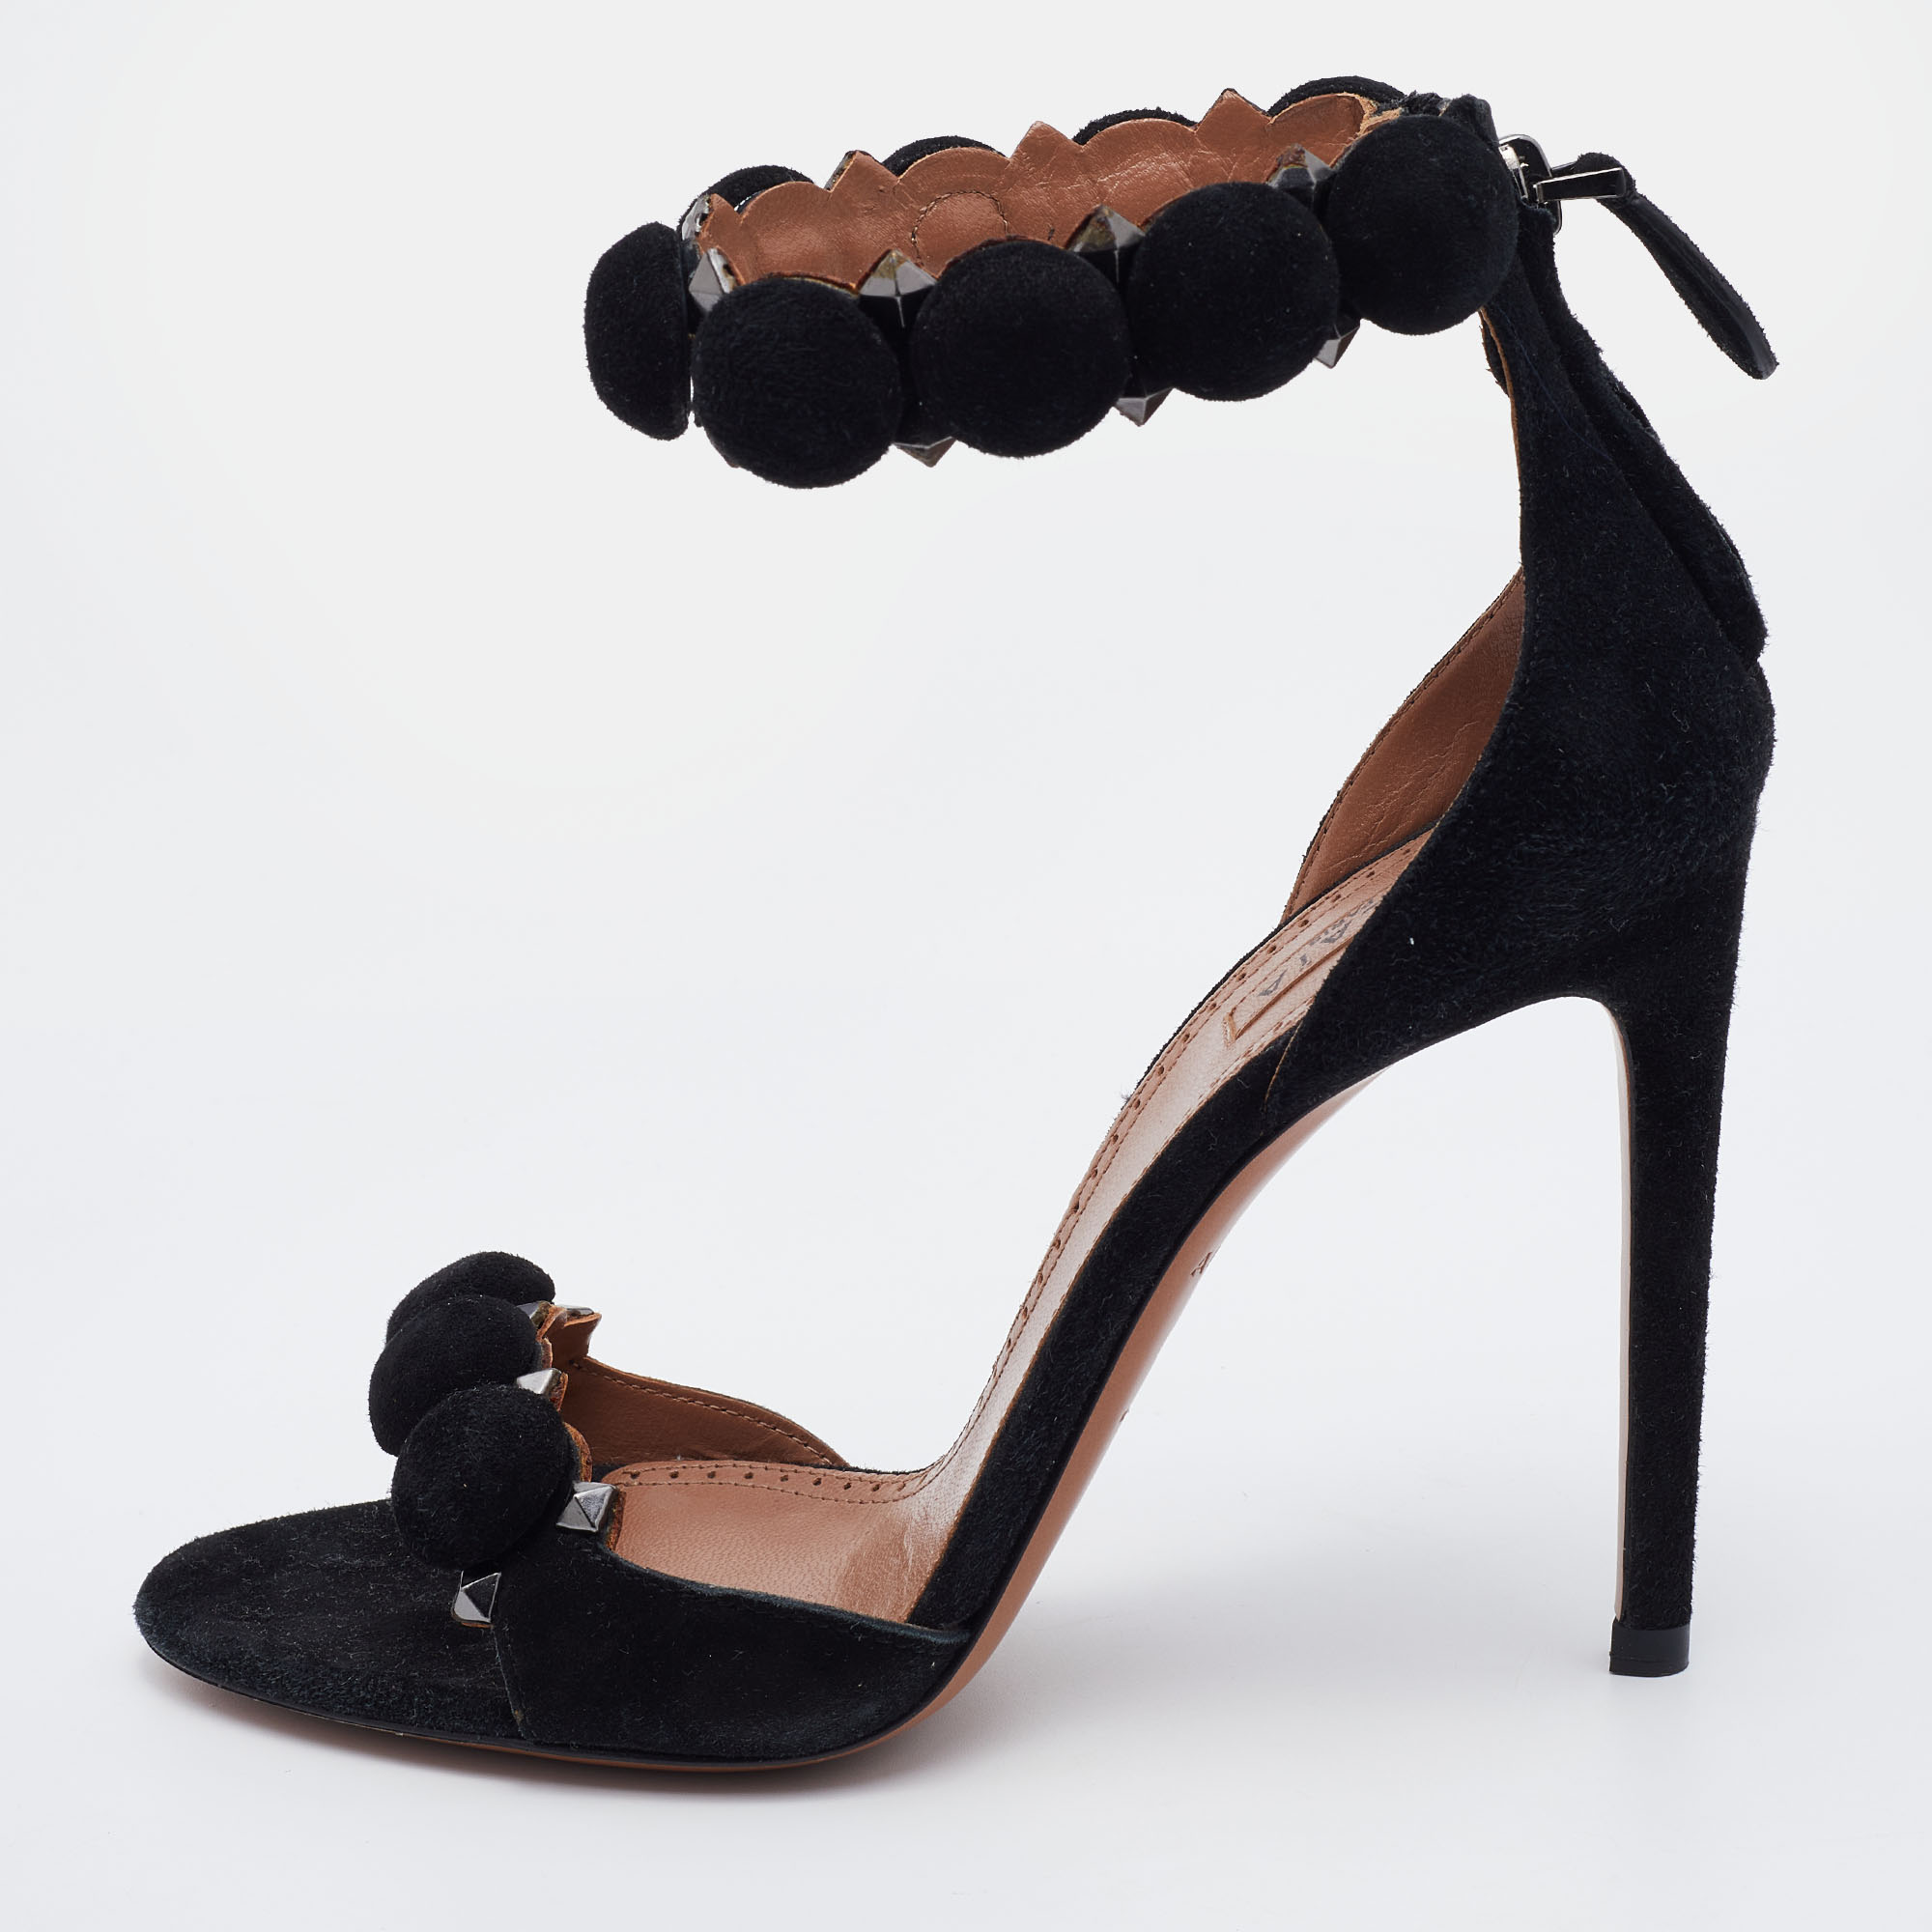 Pre-owned Alaïa Black Suede Leather Chamois Bombe Ankle Cuff Sandals Size 36.5